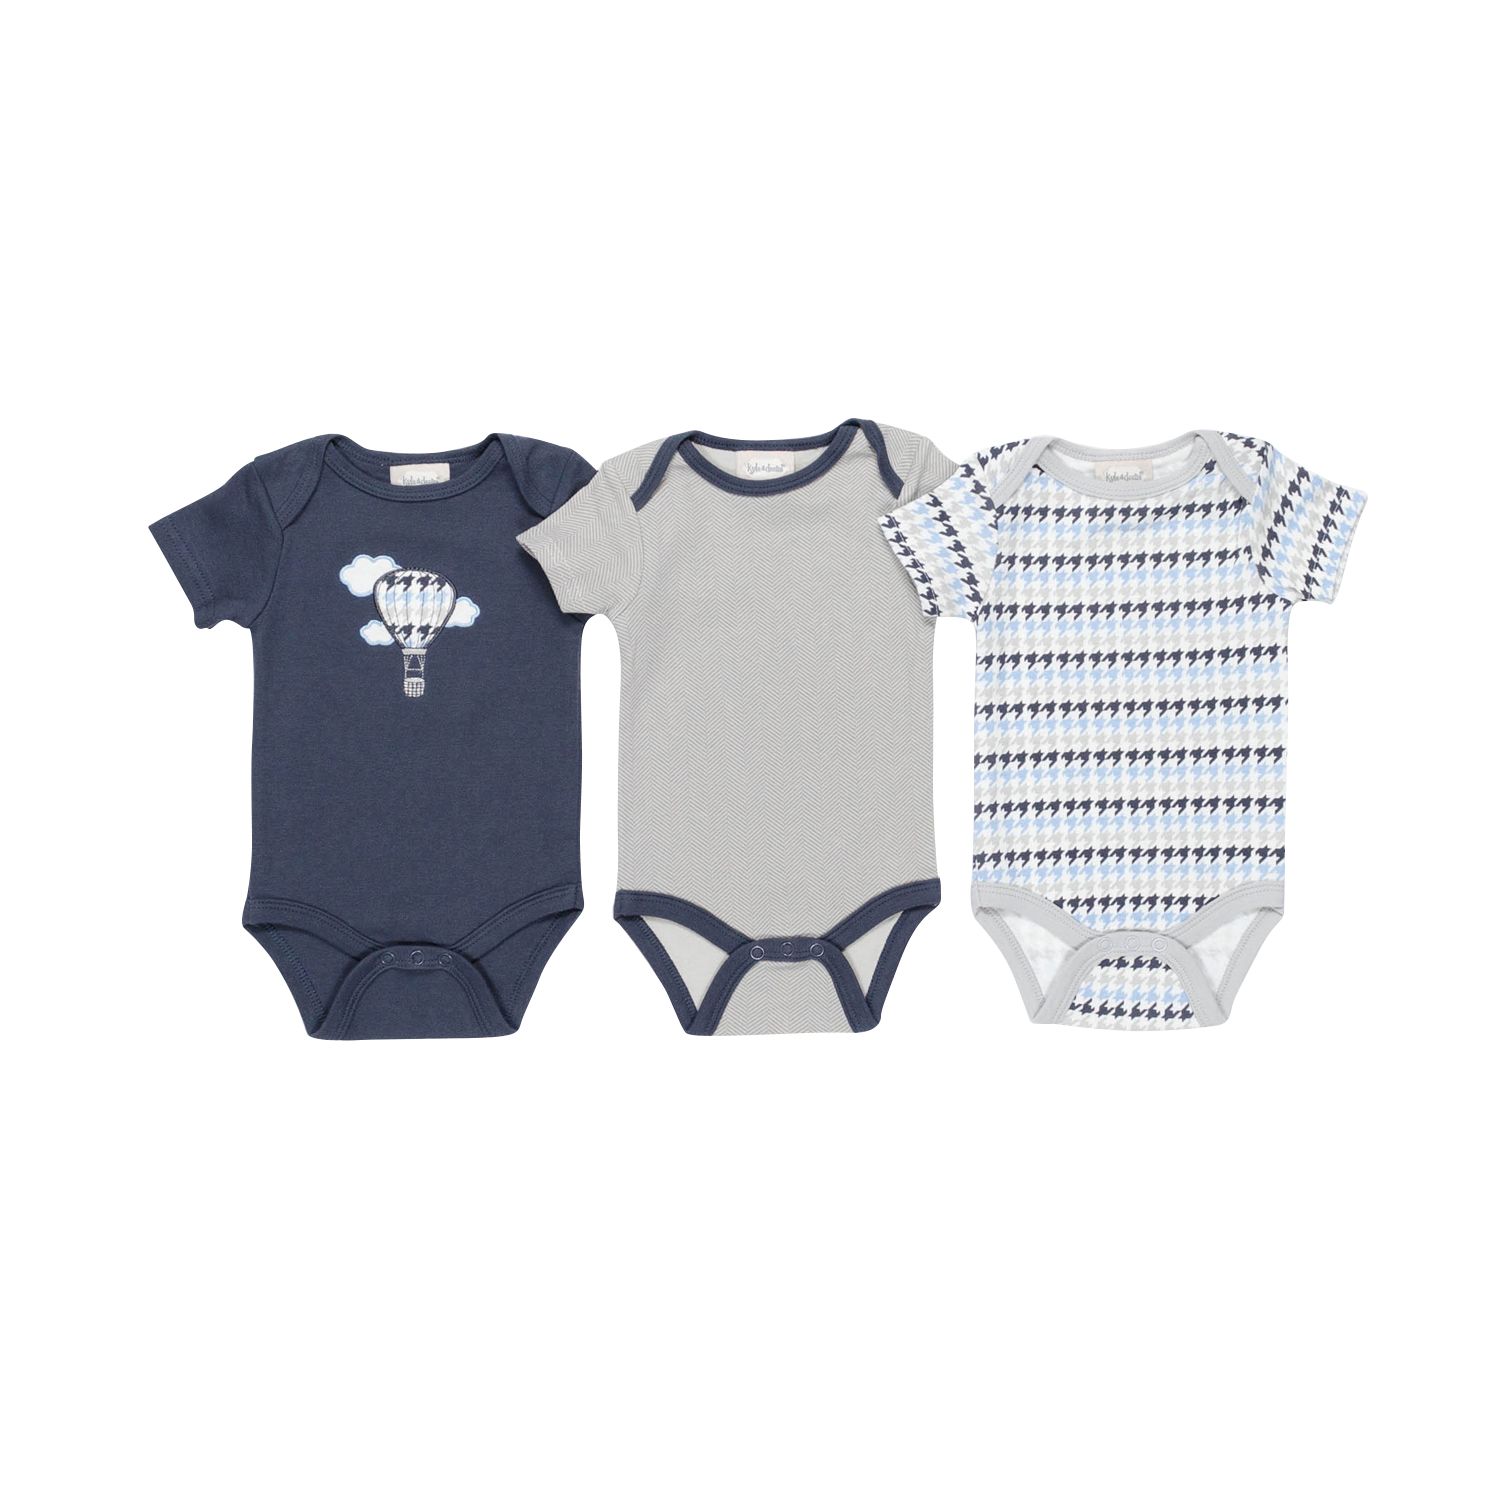 kyle and deena baby clothes